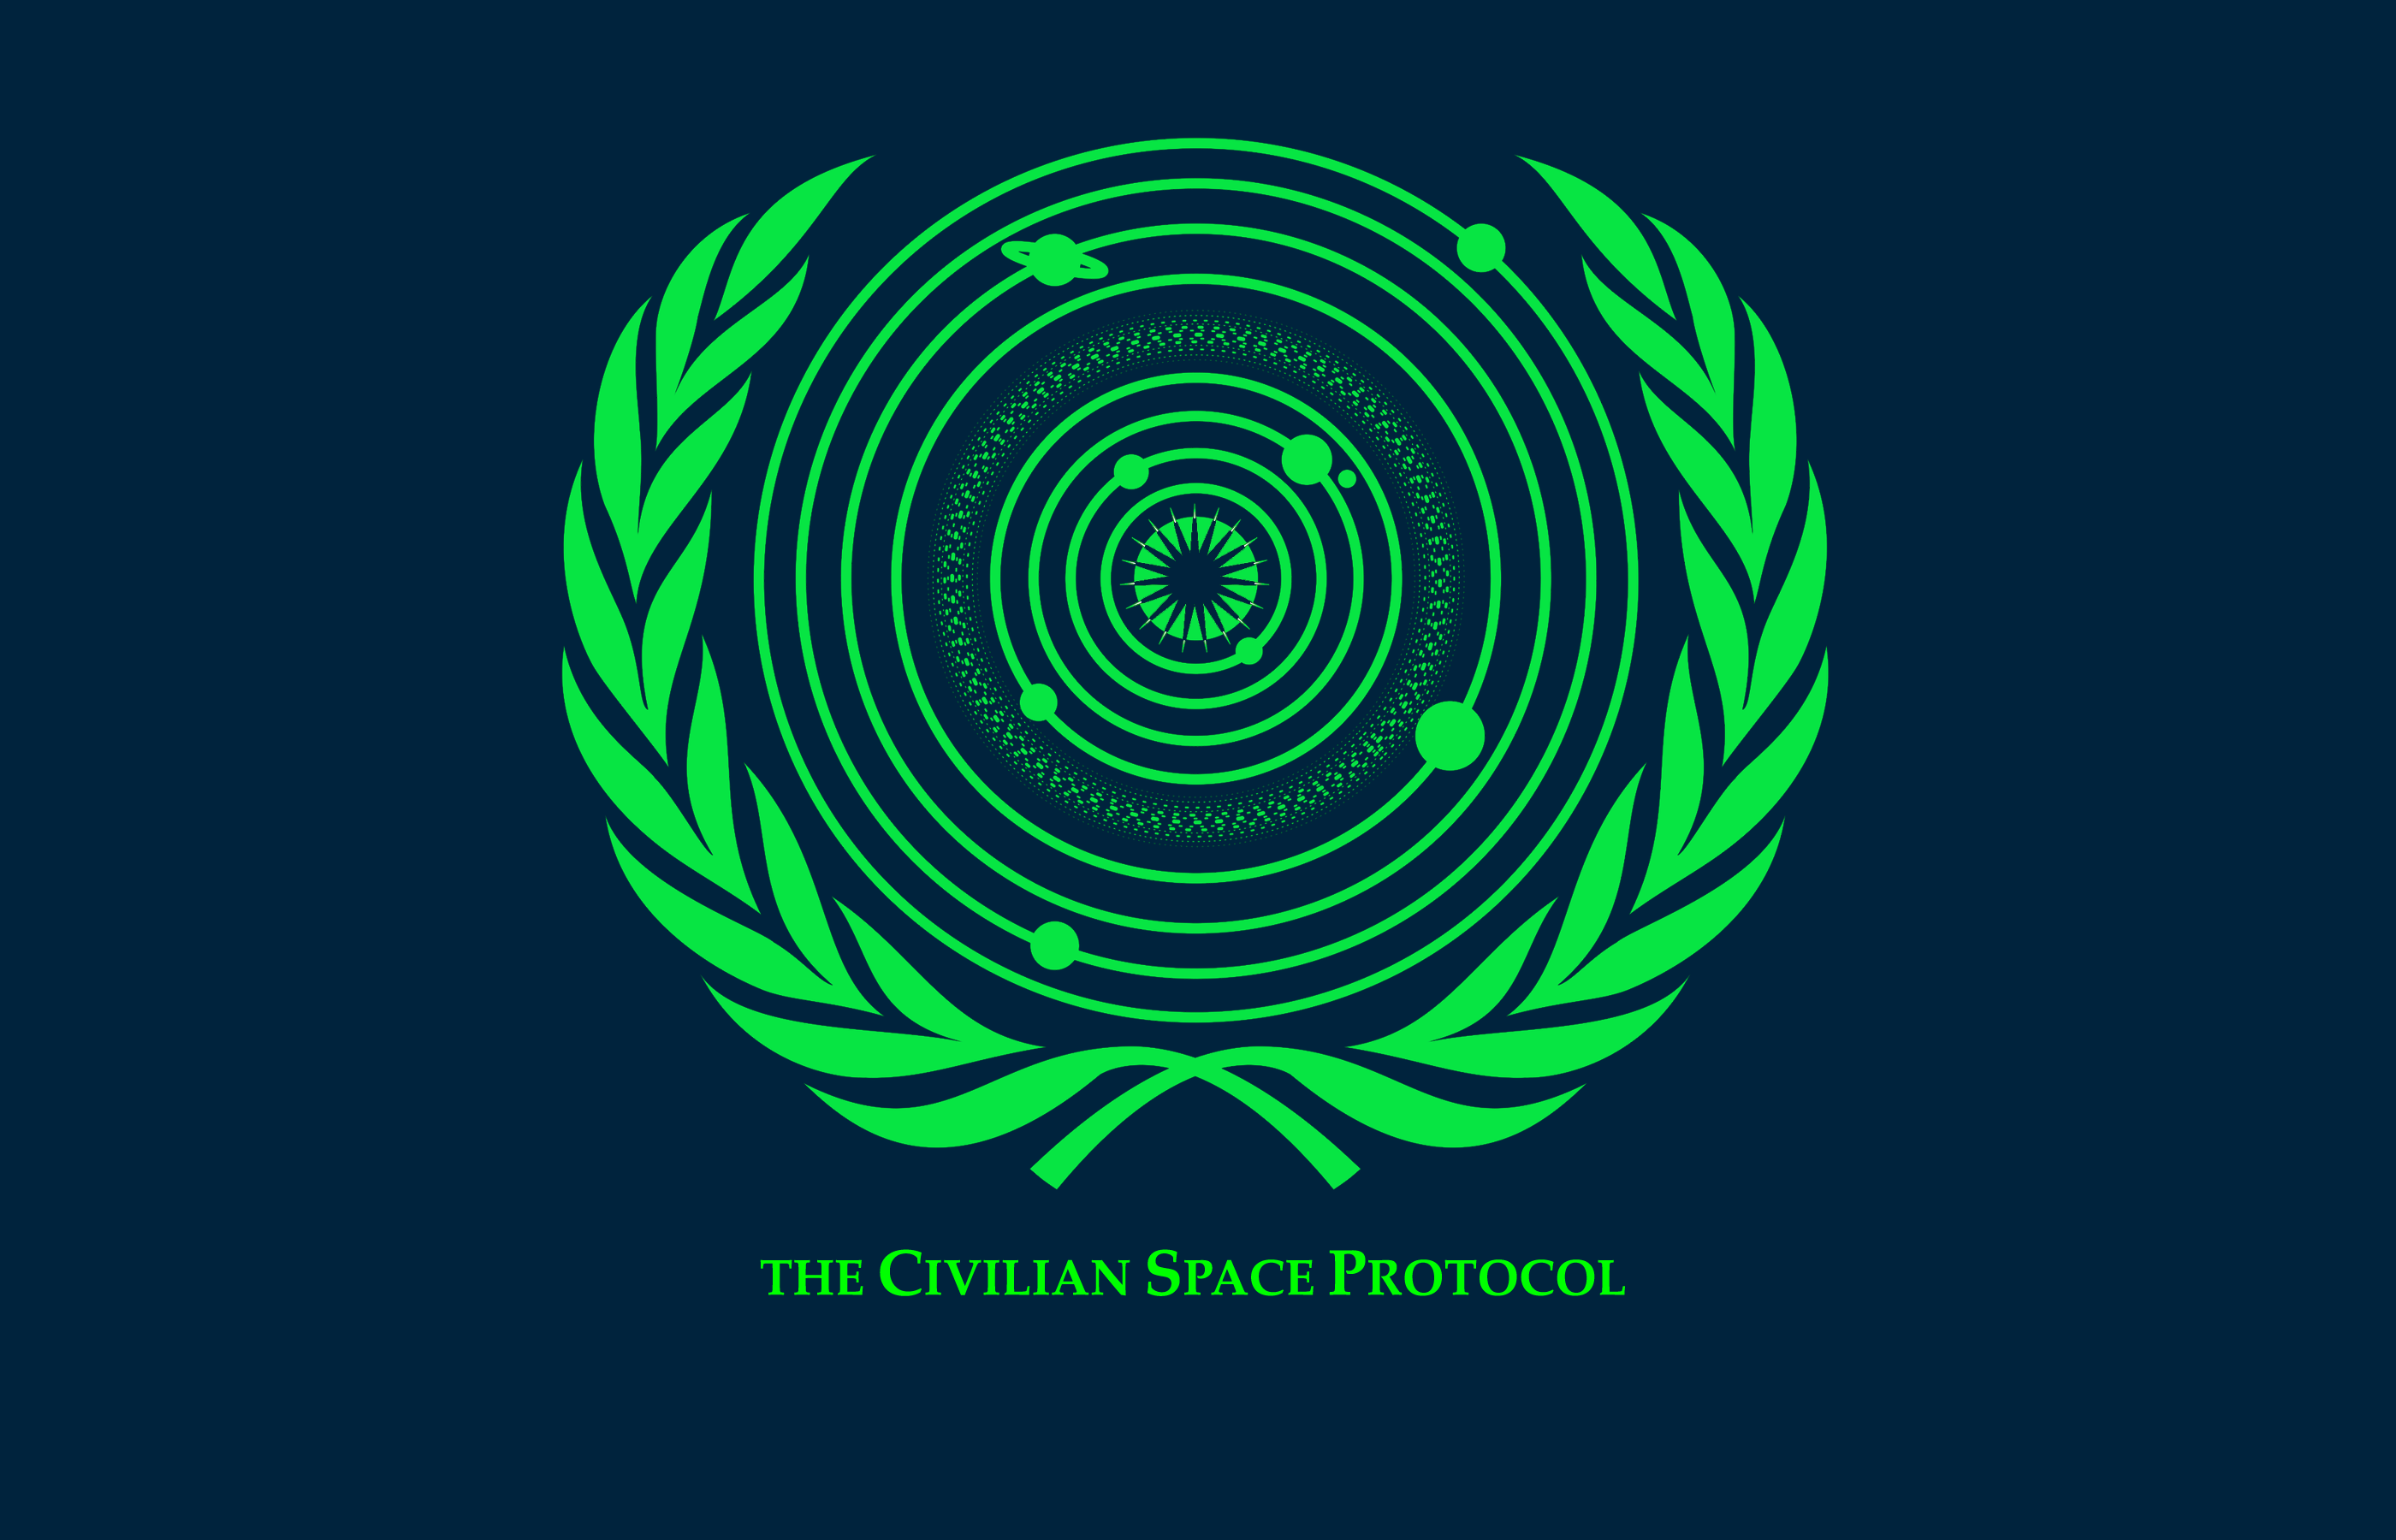 Join the Civilian Space Protocol!